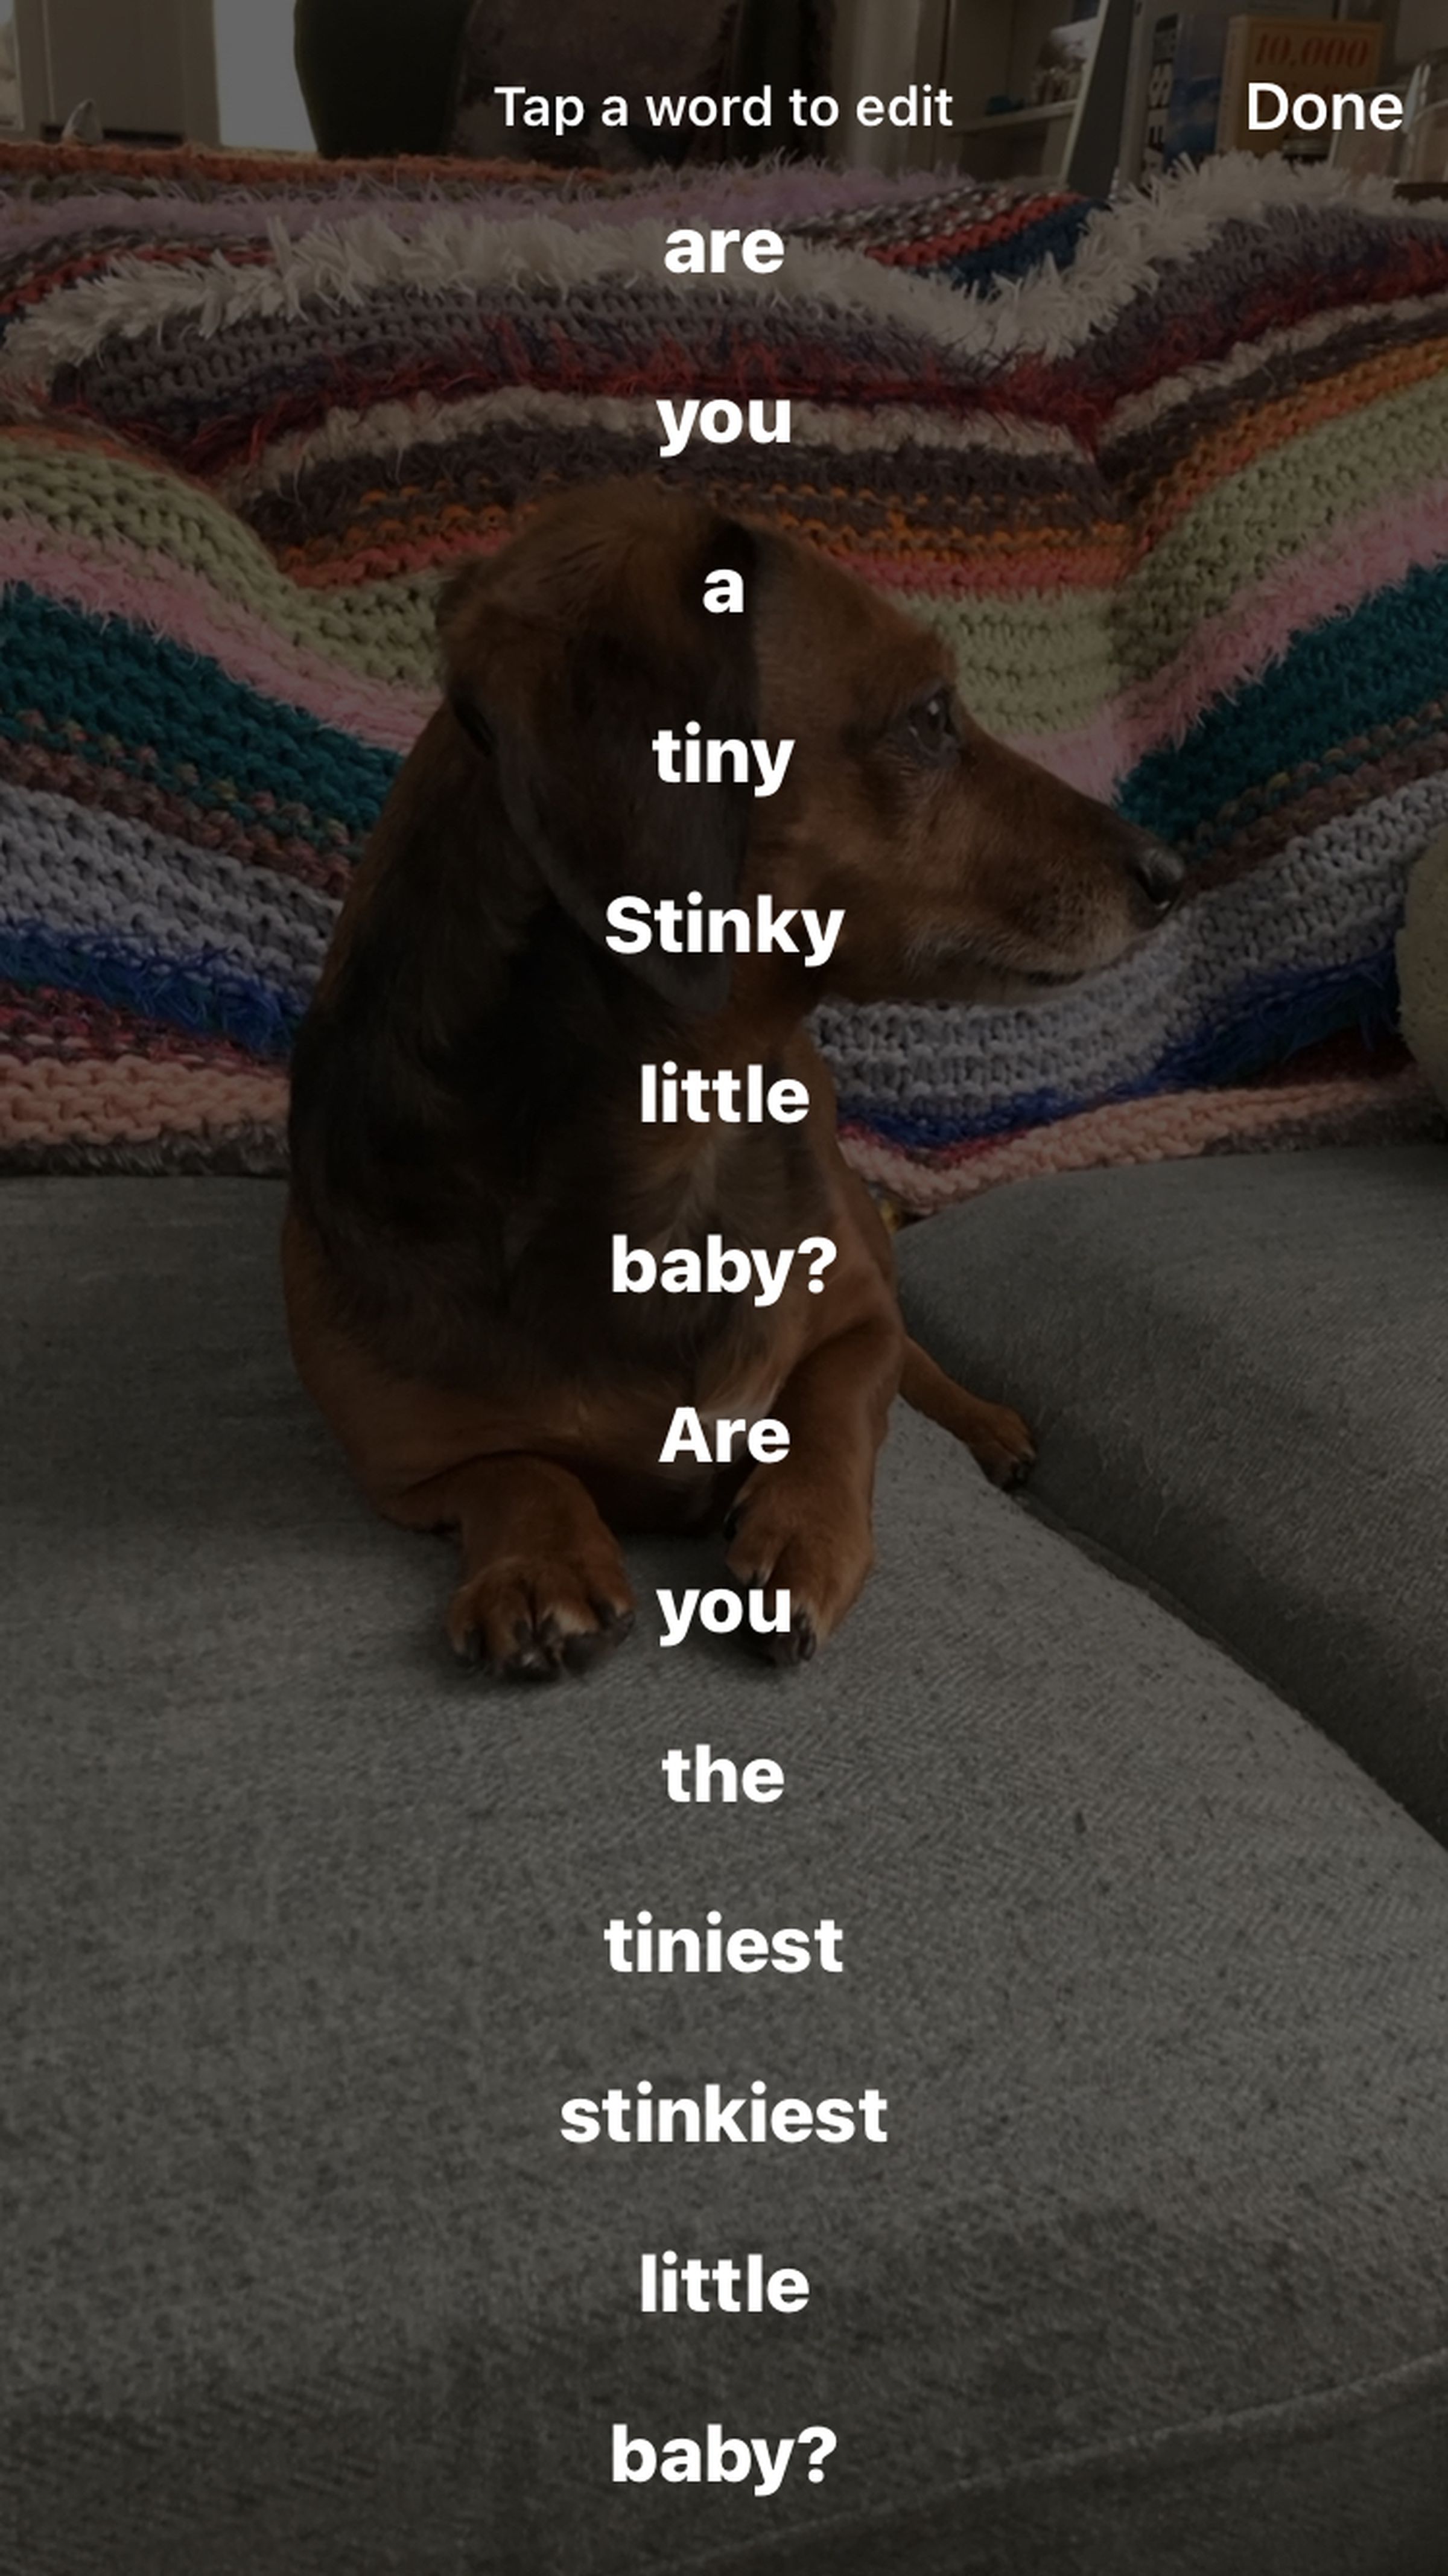 A list of words from the top to the bottom of the screen that say “are you a stinky little baby?” in front of a photo of a miniature dachshund sitting on a couch.